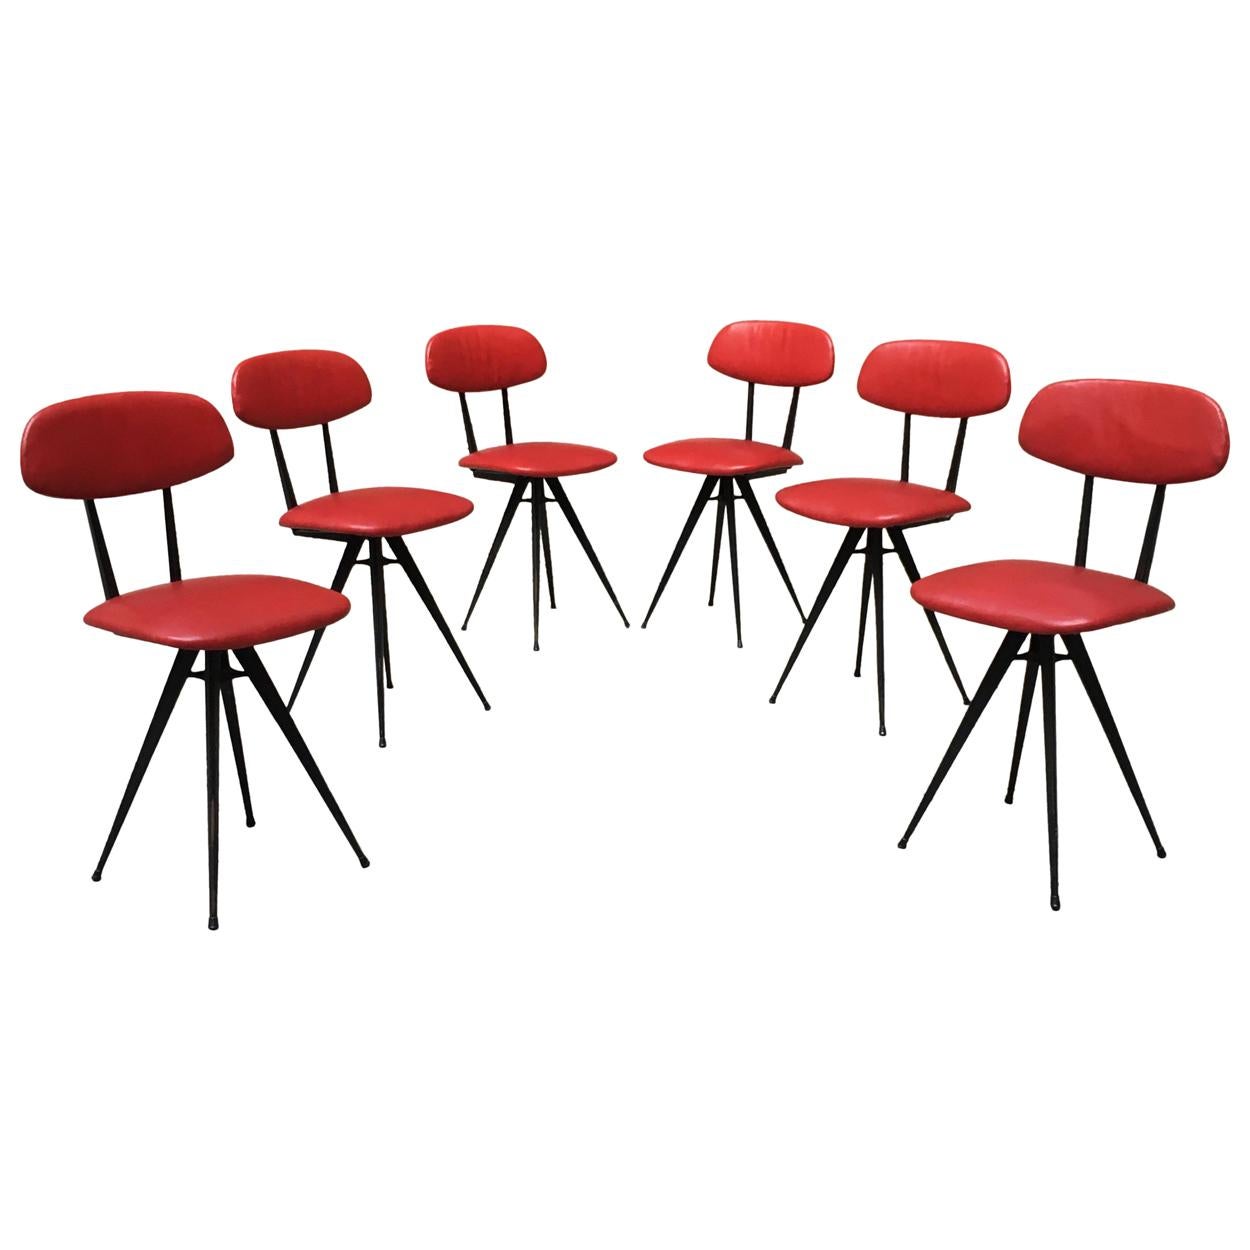 Italian Red Leatherette and Metal Legs Chairs, 1960s